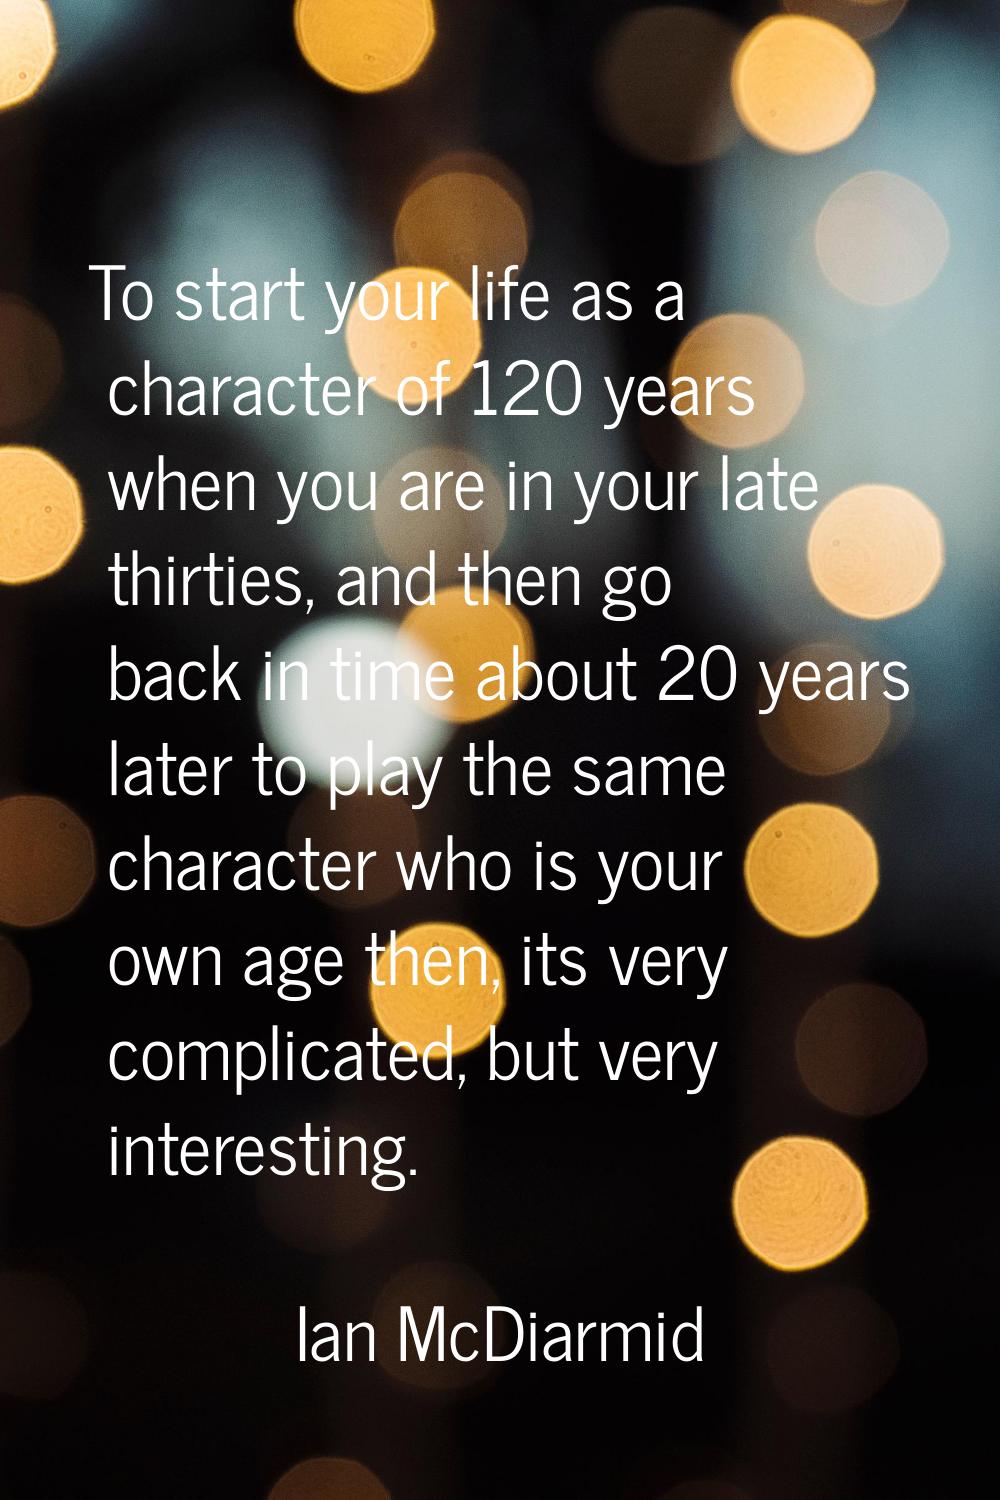 To start your life as a character of 120 years when you are in your late thirties, and then go back